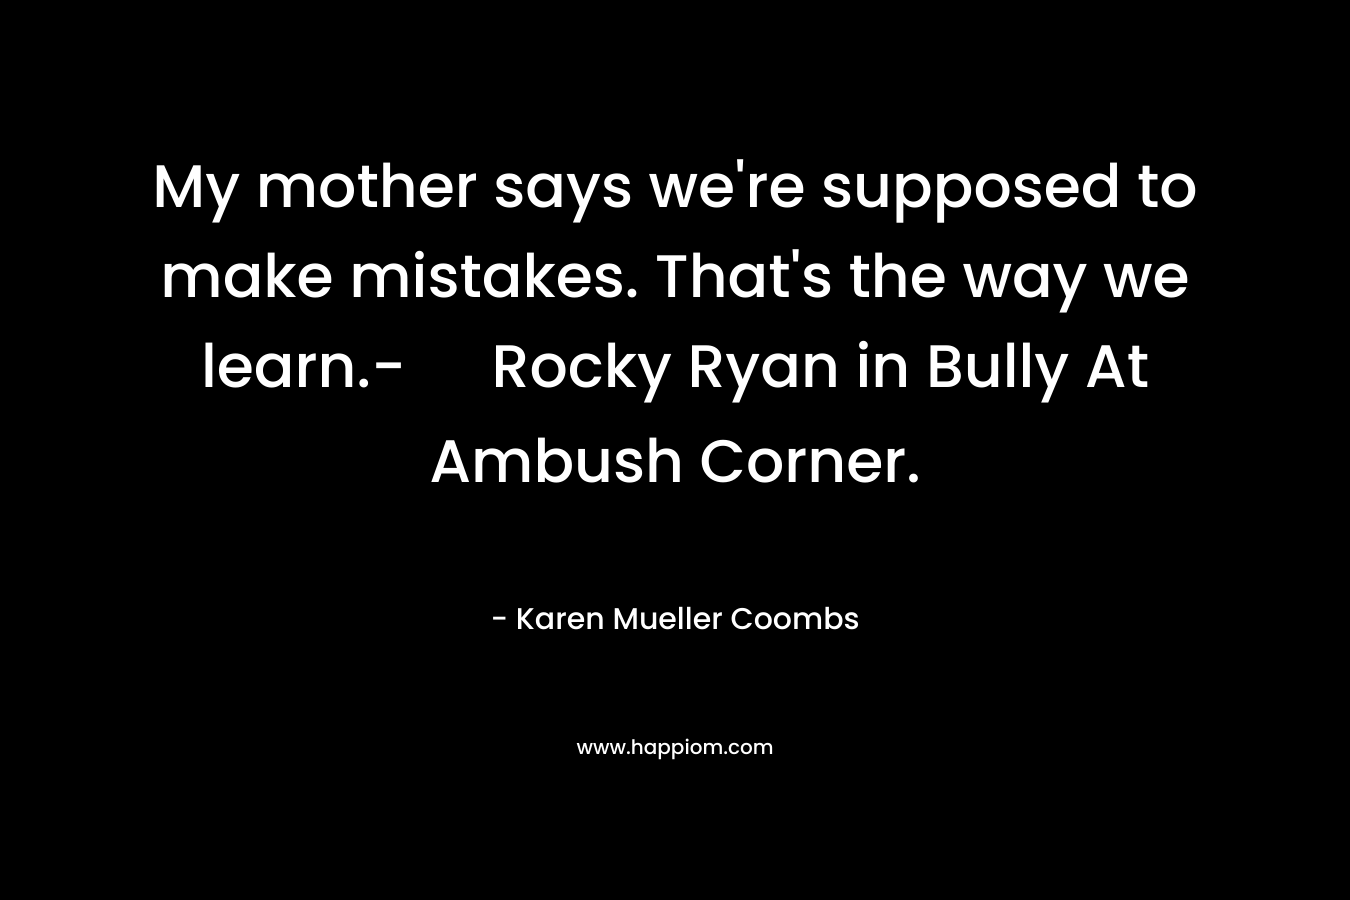 My mother says we’re supposed to make mistakes. That’s the way we learn.- Rocky Ryan in Bully At Ambush Corner. – Karen Mueller Coombs